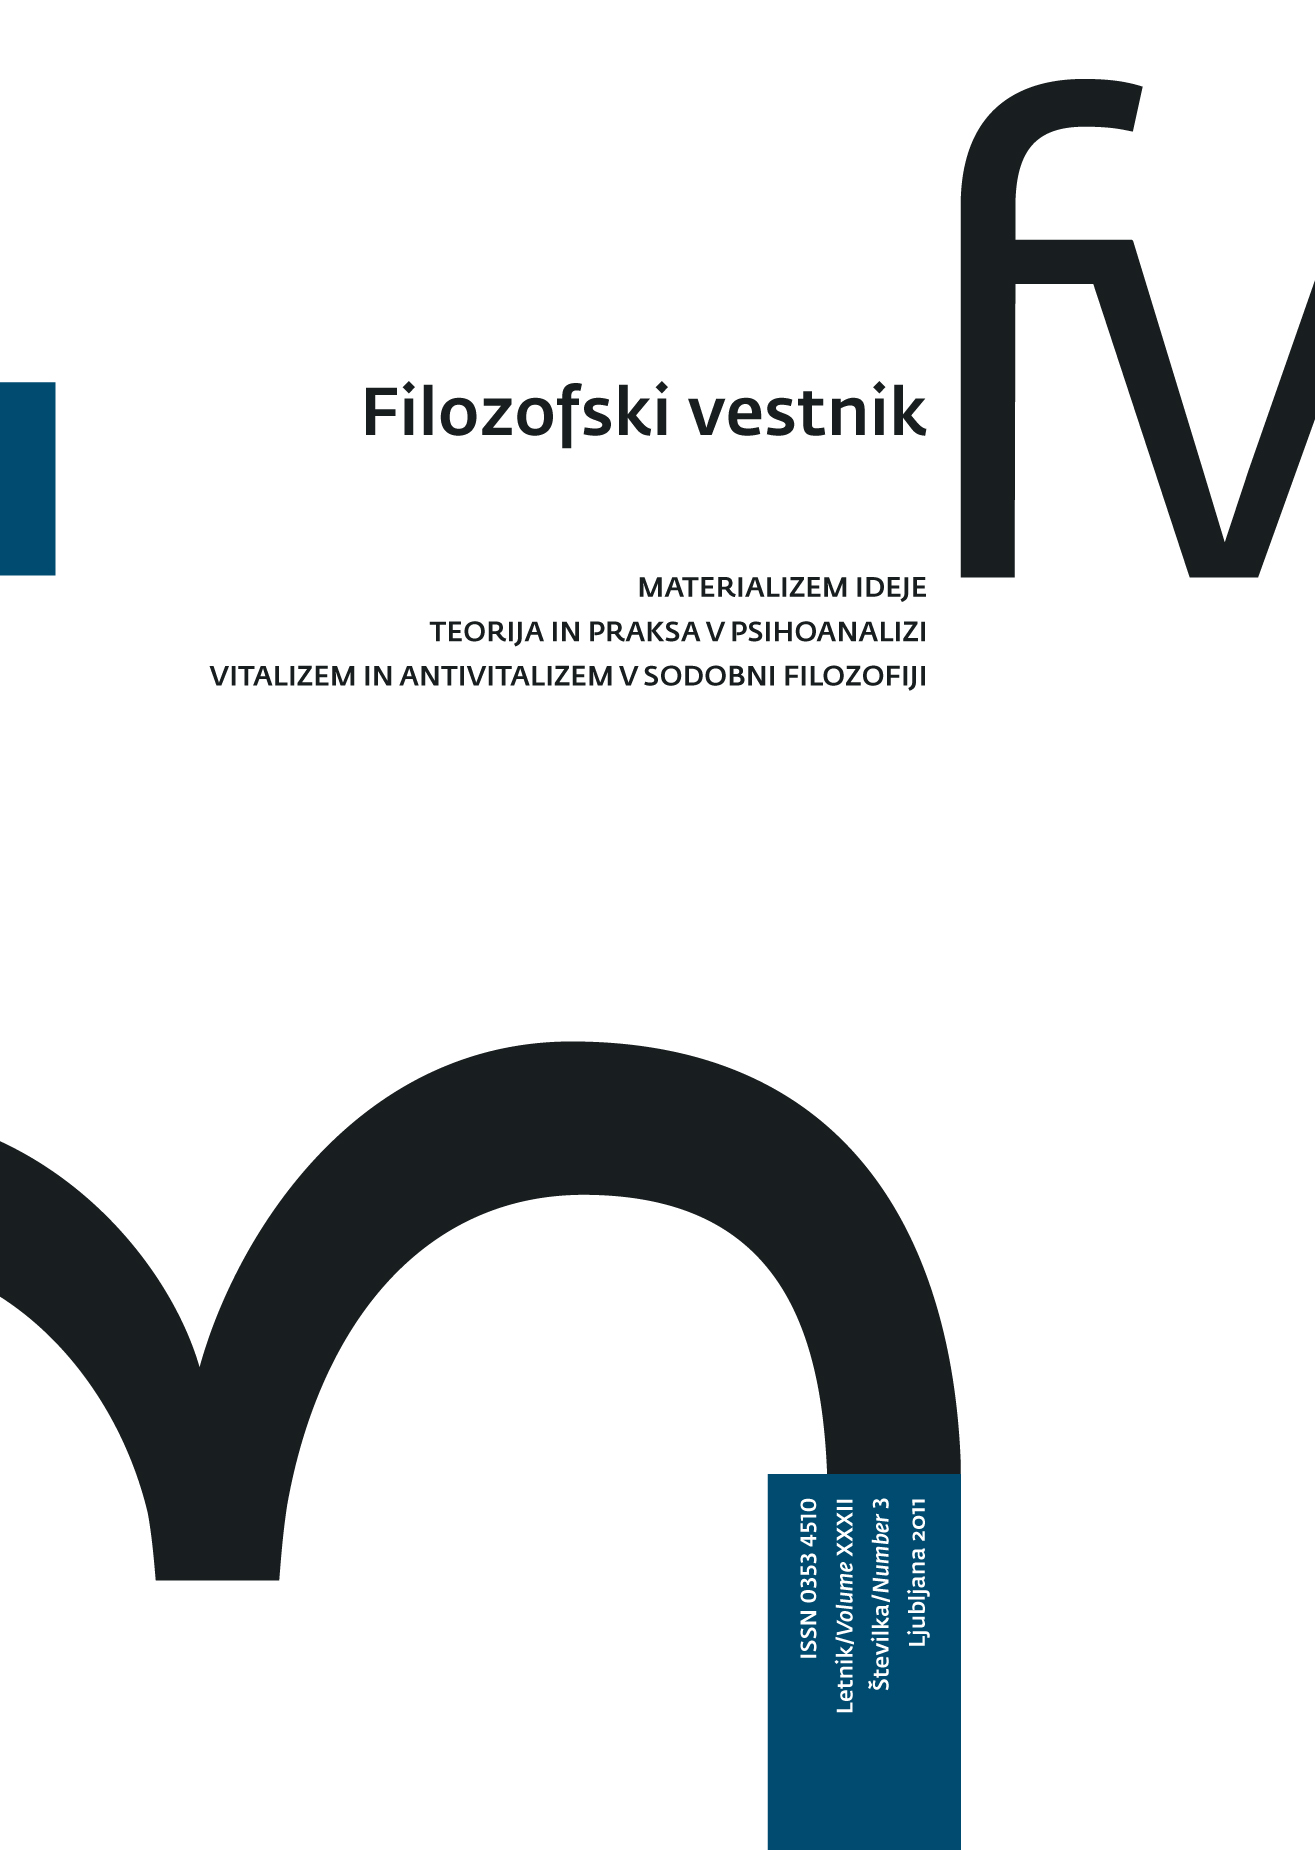 					View Vol. 32 No. 3 (2011): A Materialism of the Idea, Theory and Praxis in Psyhoanalysis, Vitalism and Antivitalism in Contemporary Philosophy
				